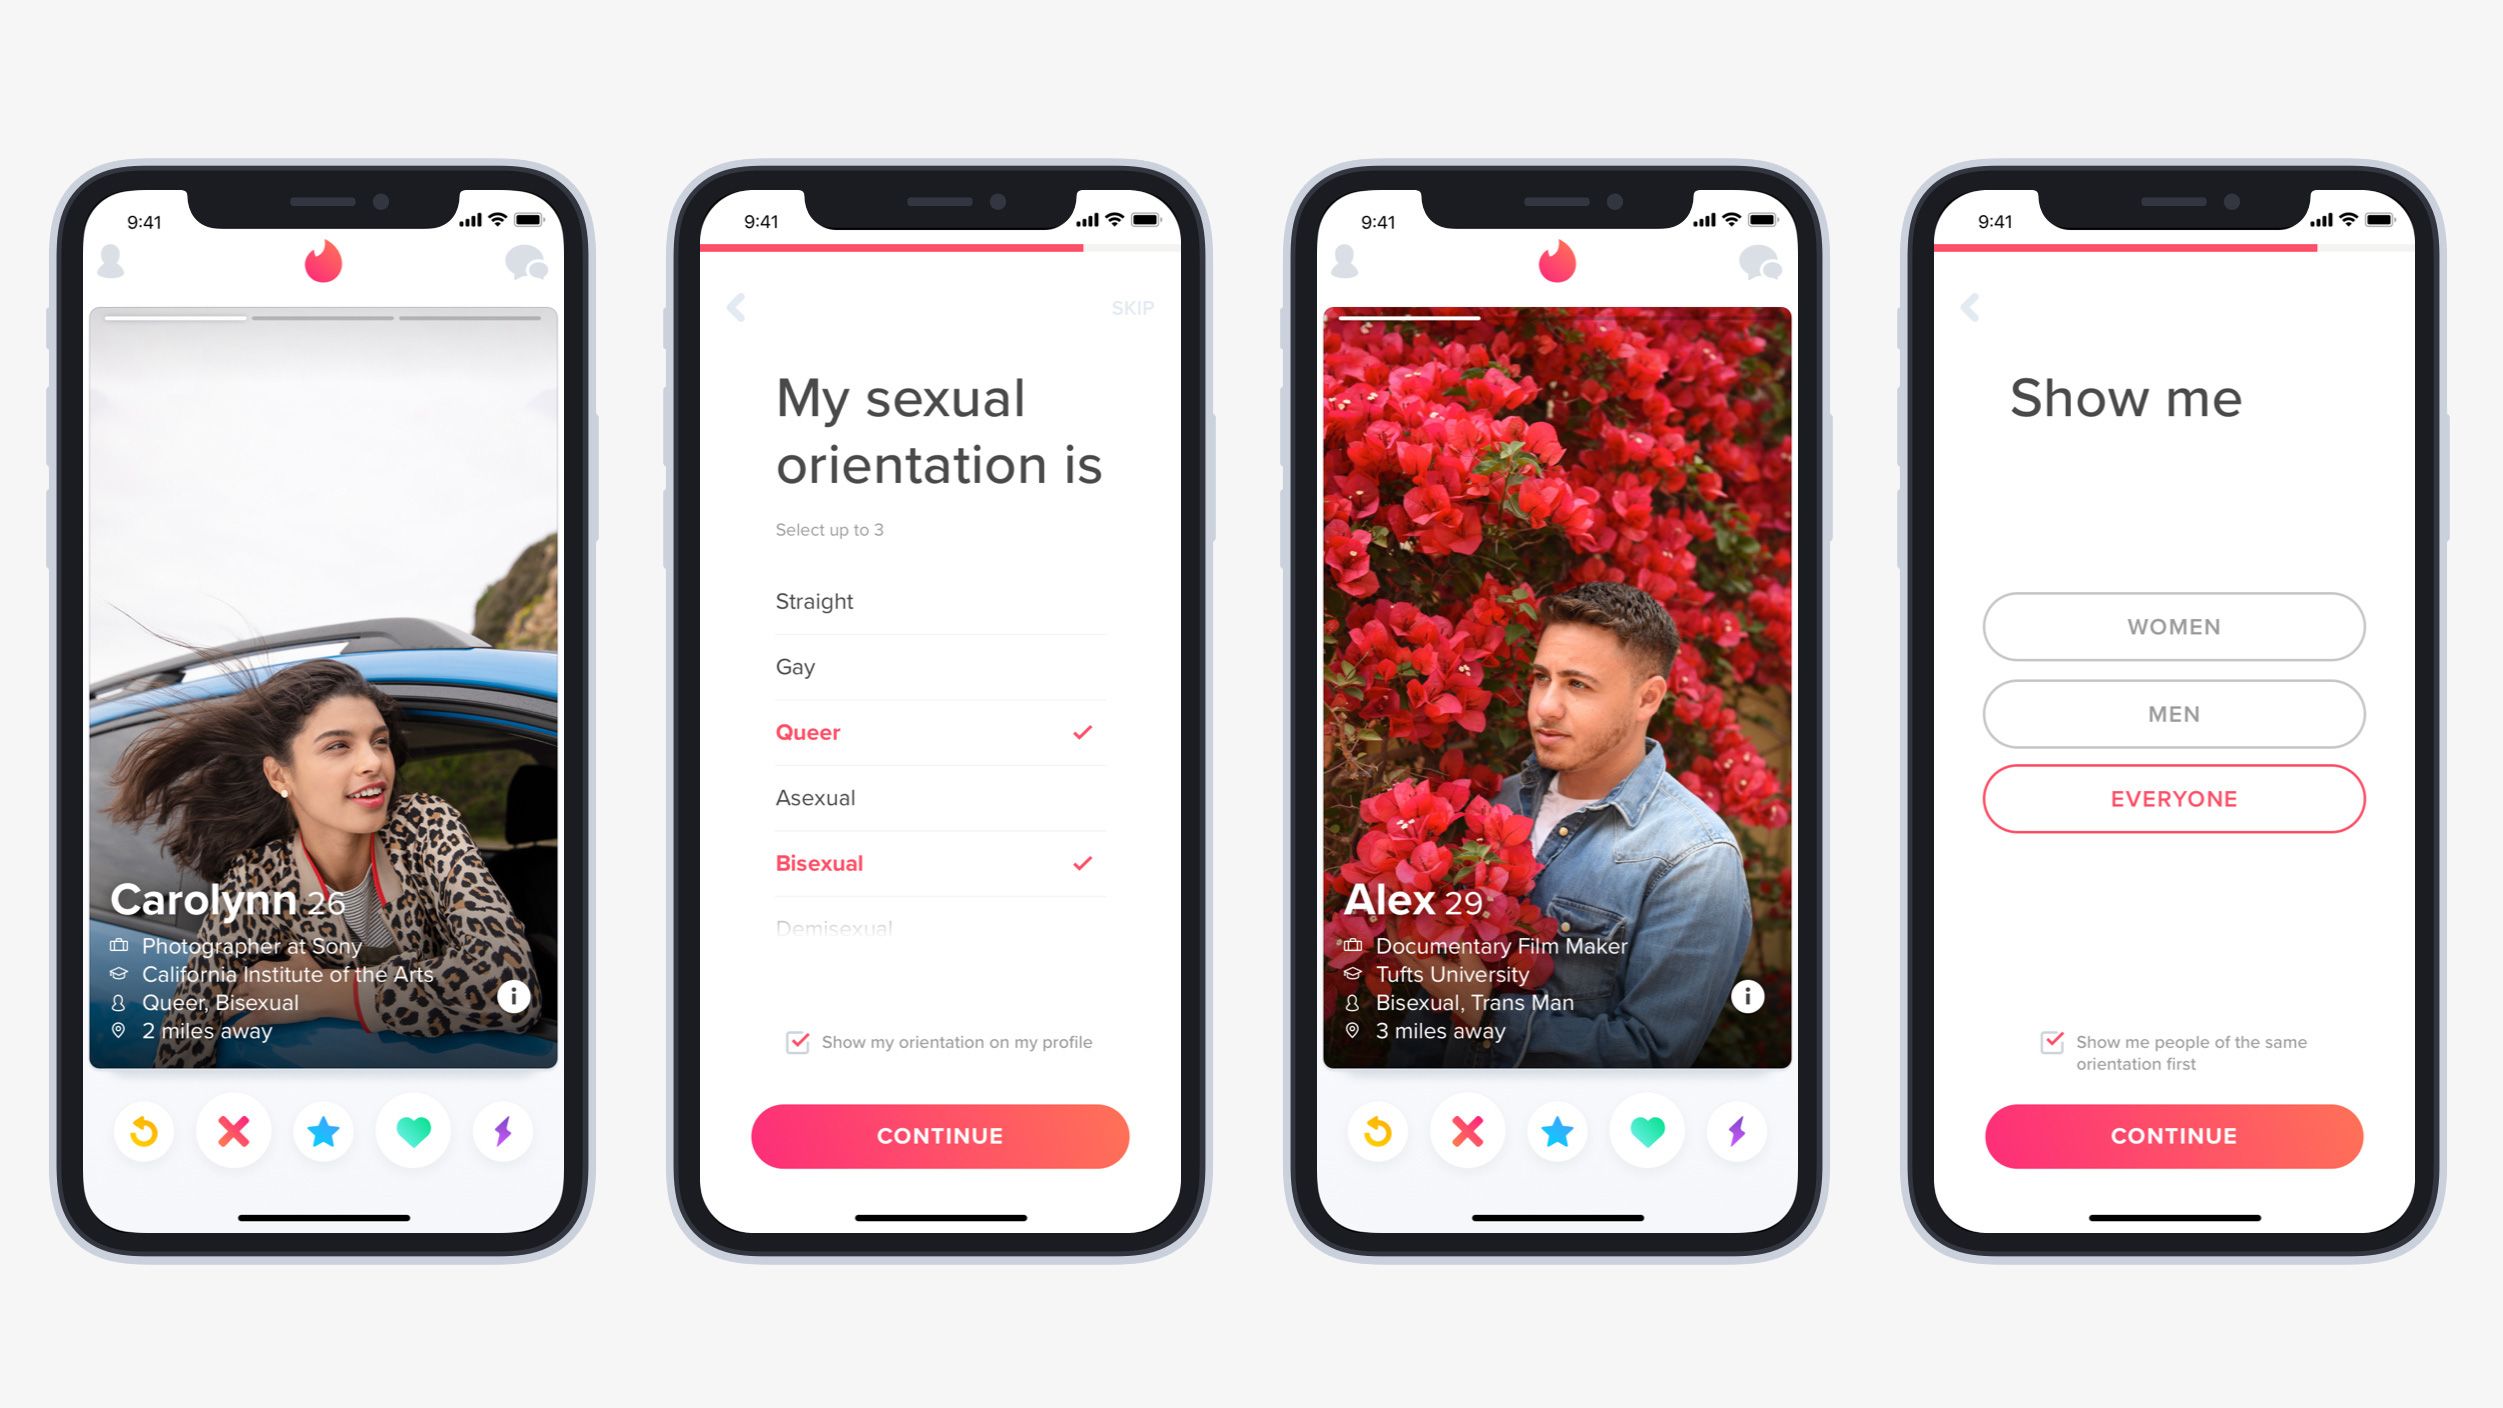 Tinder adds sexual orientation feature to aid LGBTQ matching | CNN Business